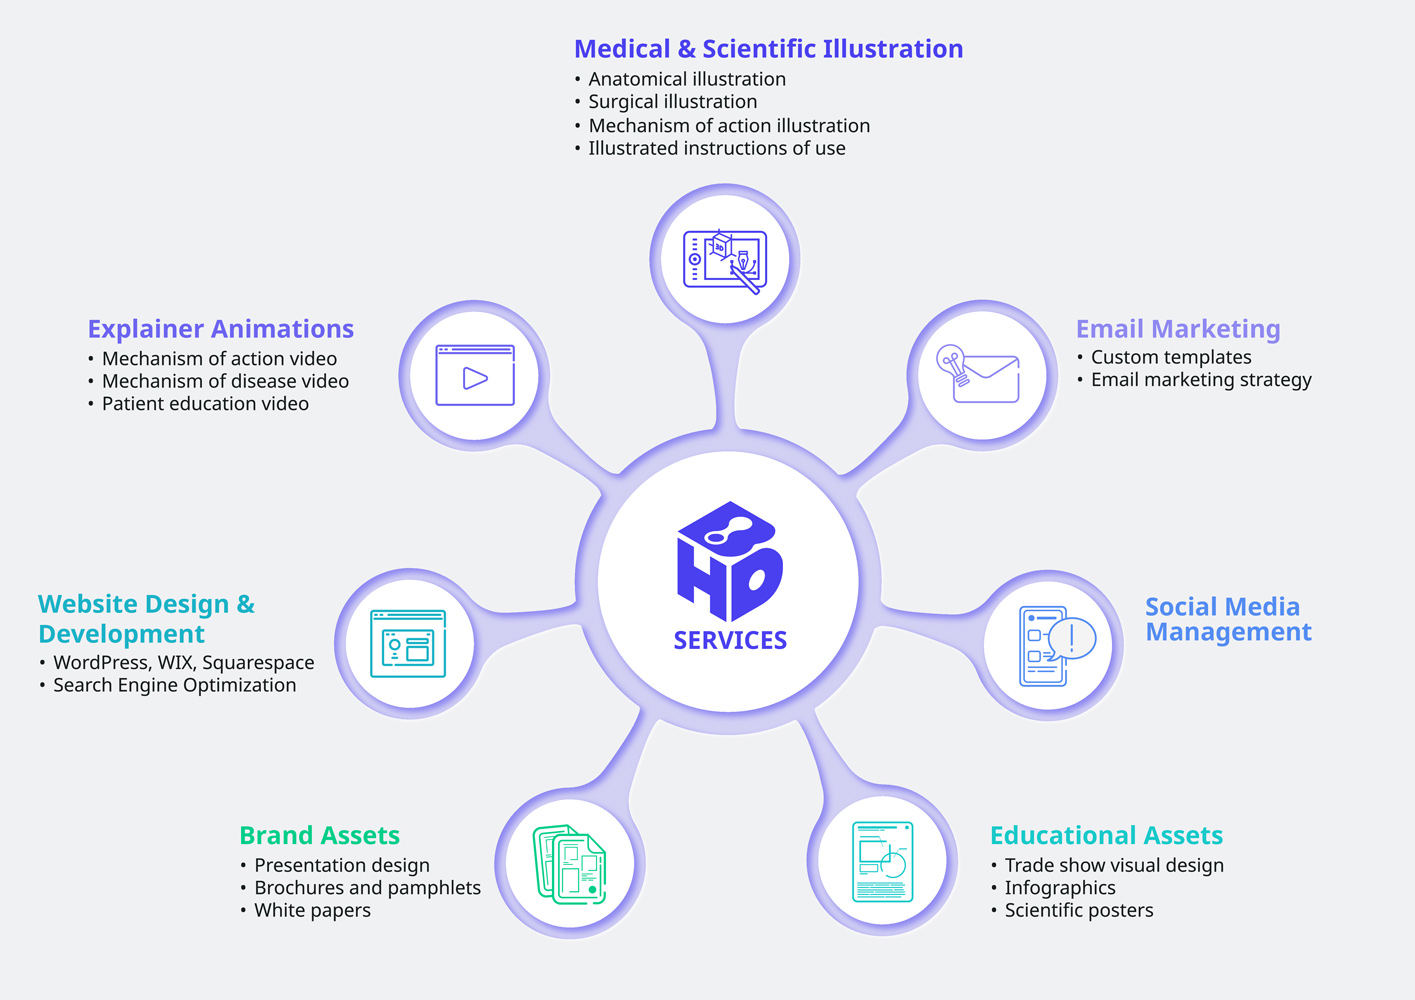 A visual diagram describing all the services offered by BioHues Digital including medical visualization, animation, website design and marketing